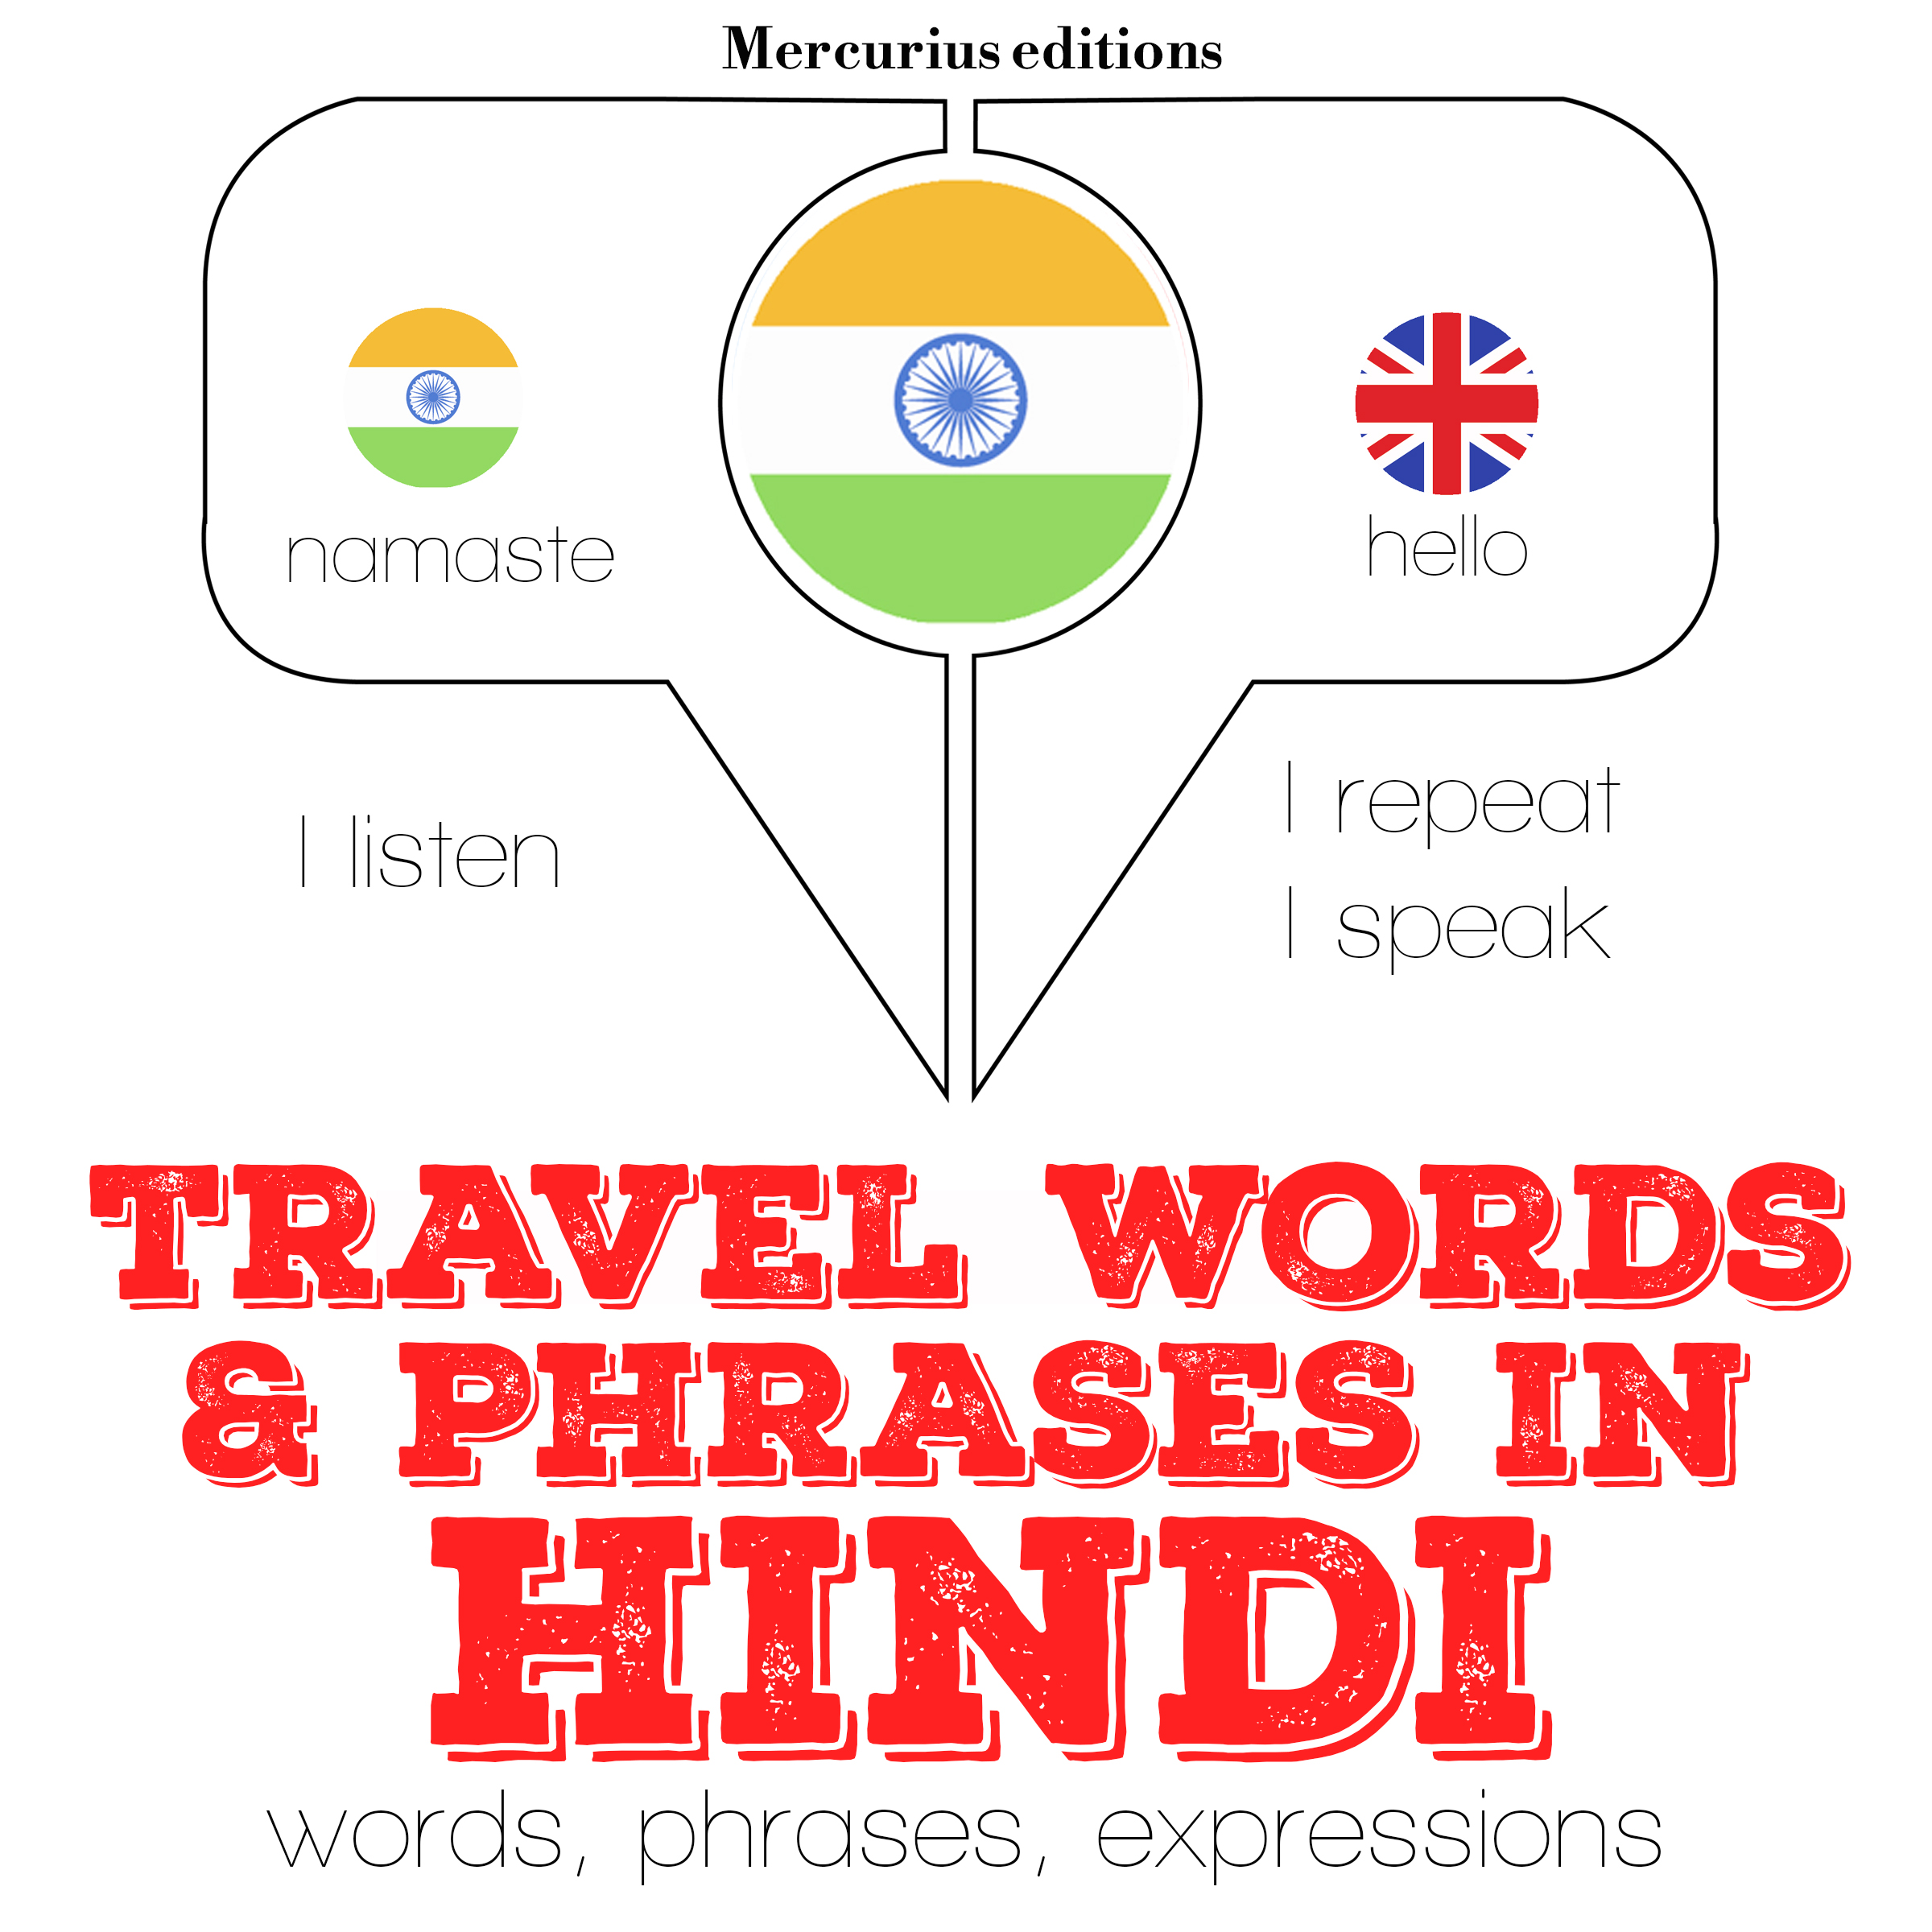 trip word in hindi meaning